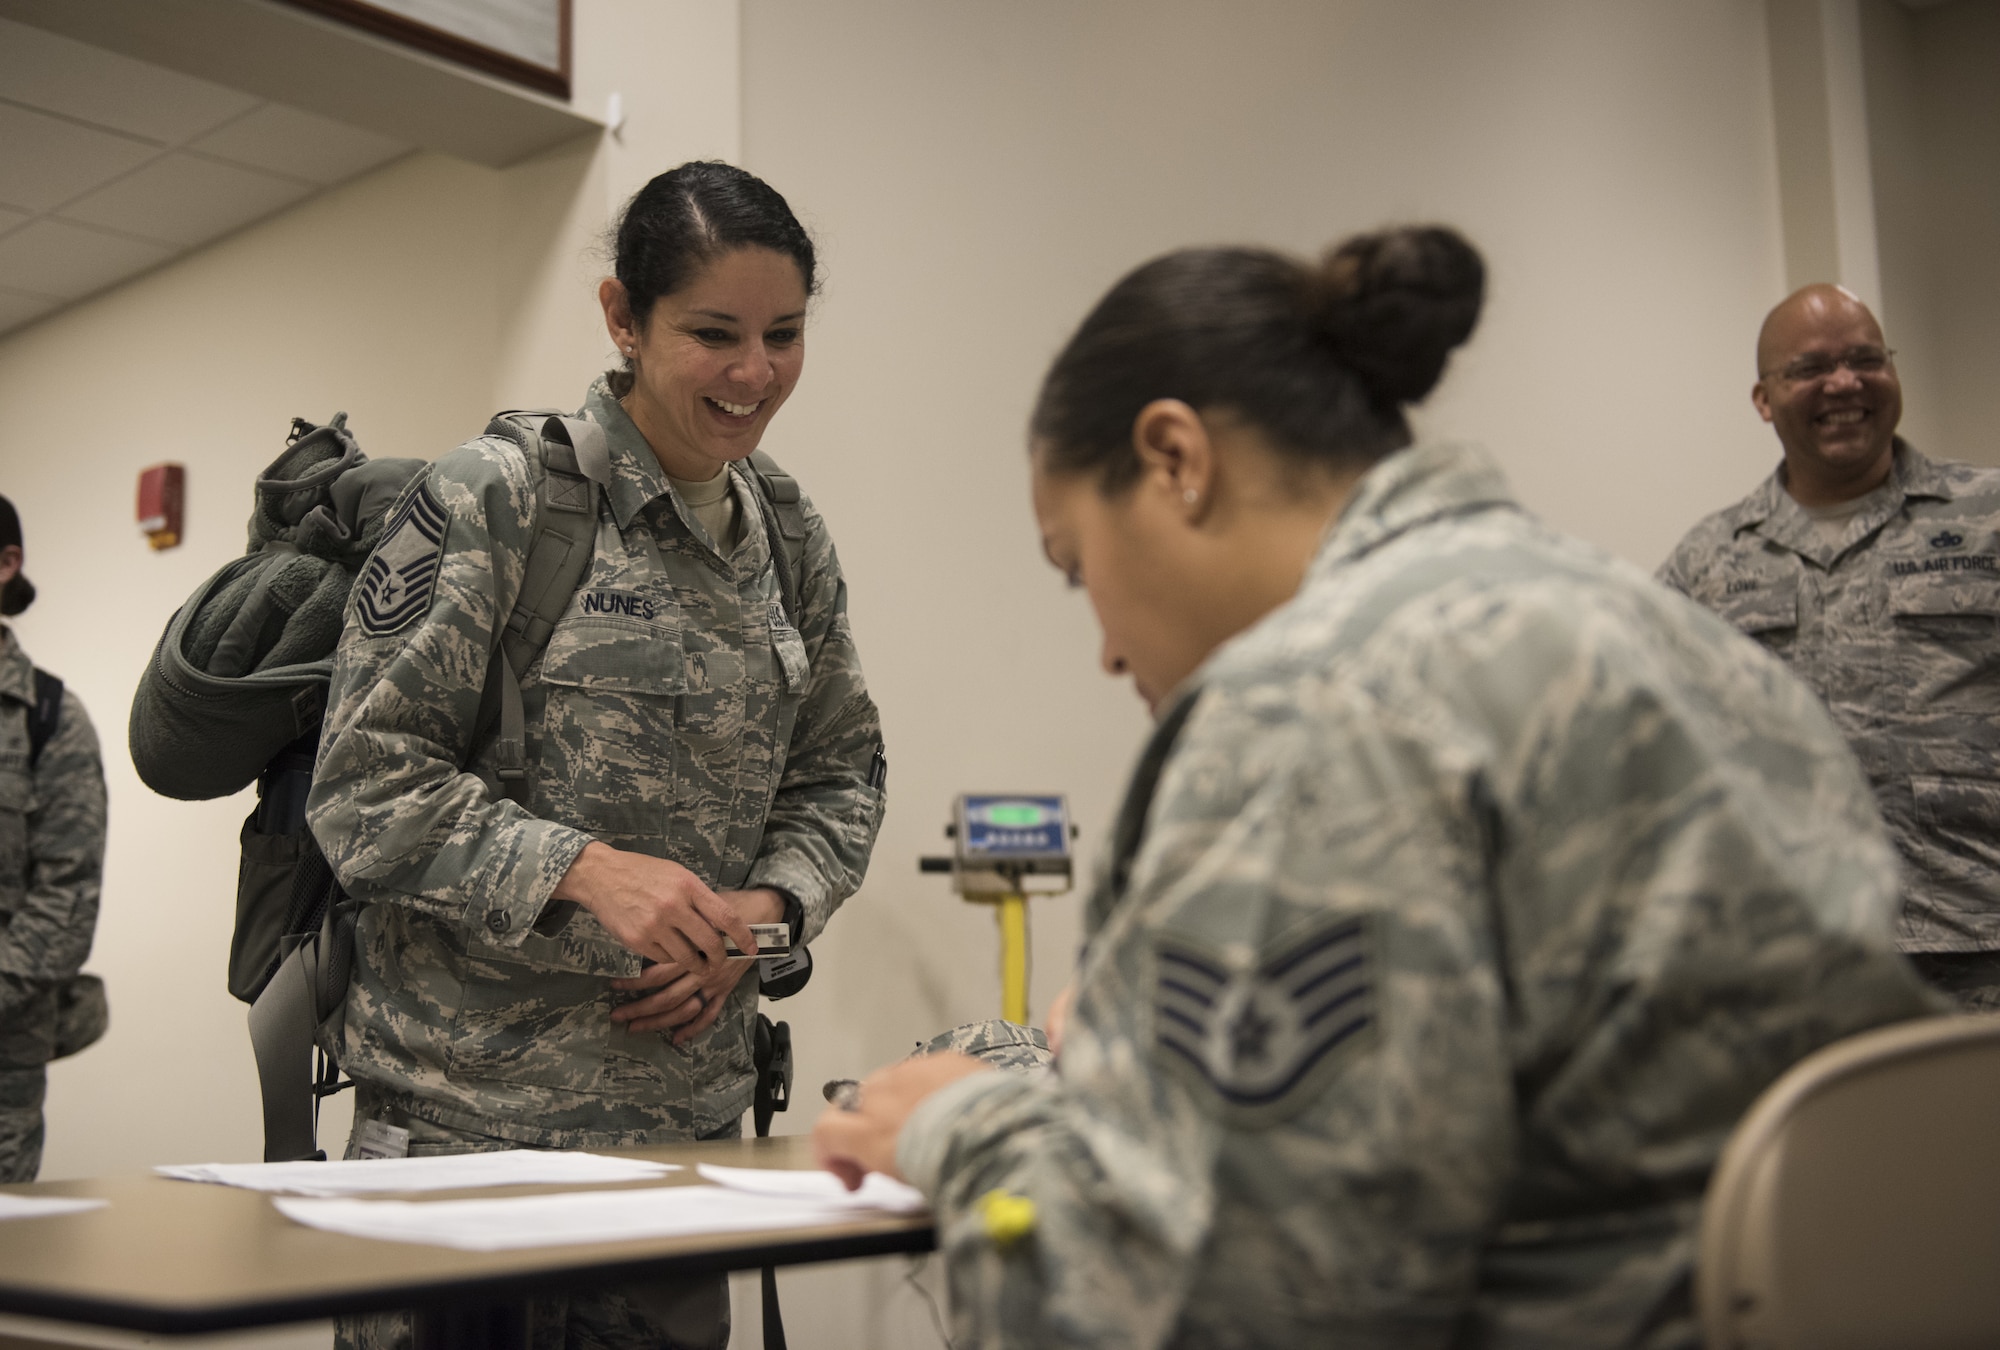 U.S. Air Force Chief Master Sgt. Sandra Nunes, 81st Medical Operations Squadron superintendent, in processes at the Roberts Consolidated Aircraft Maintenance Facility at Keesler Air Force Base, Mississippi, April 16, 2018. Ninety-nine Airmen from the 81st Medical Group traveled to Indiana to help set up a medical facility in support of Joint Task Force Civil Service. More than 3,200 Defense Department and civilian medical personnel are participating in the operation. (U.S. Air Force photo by Senior Airman Holly Mansfield)